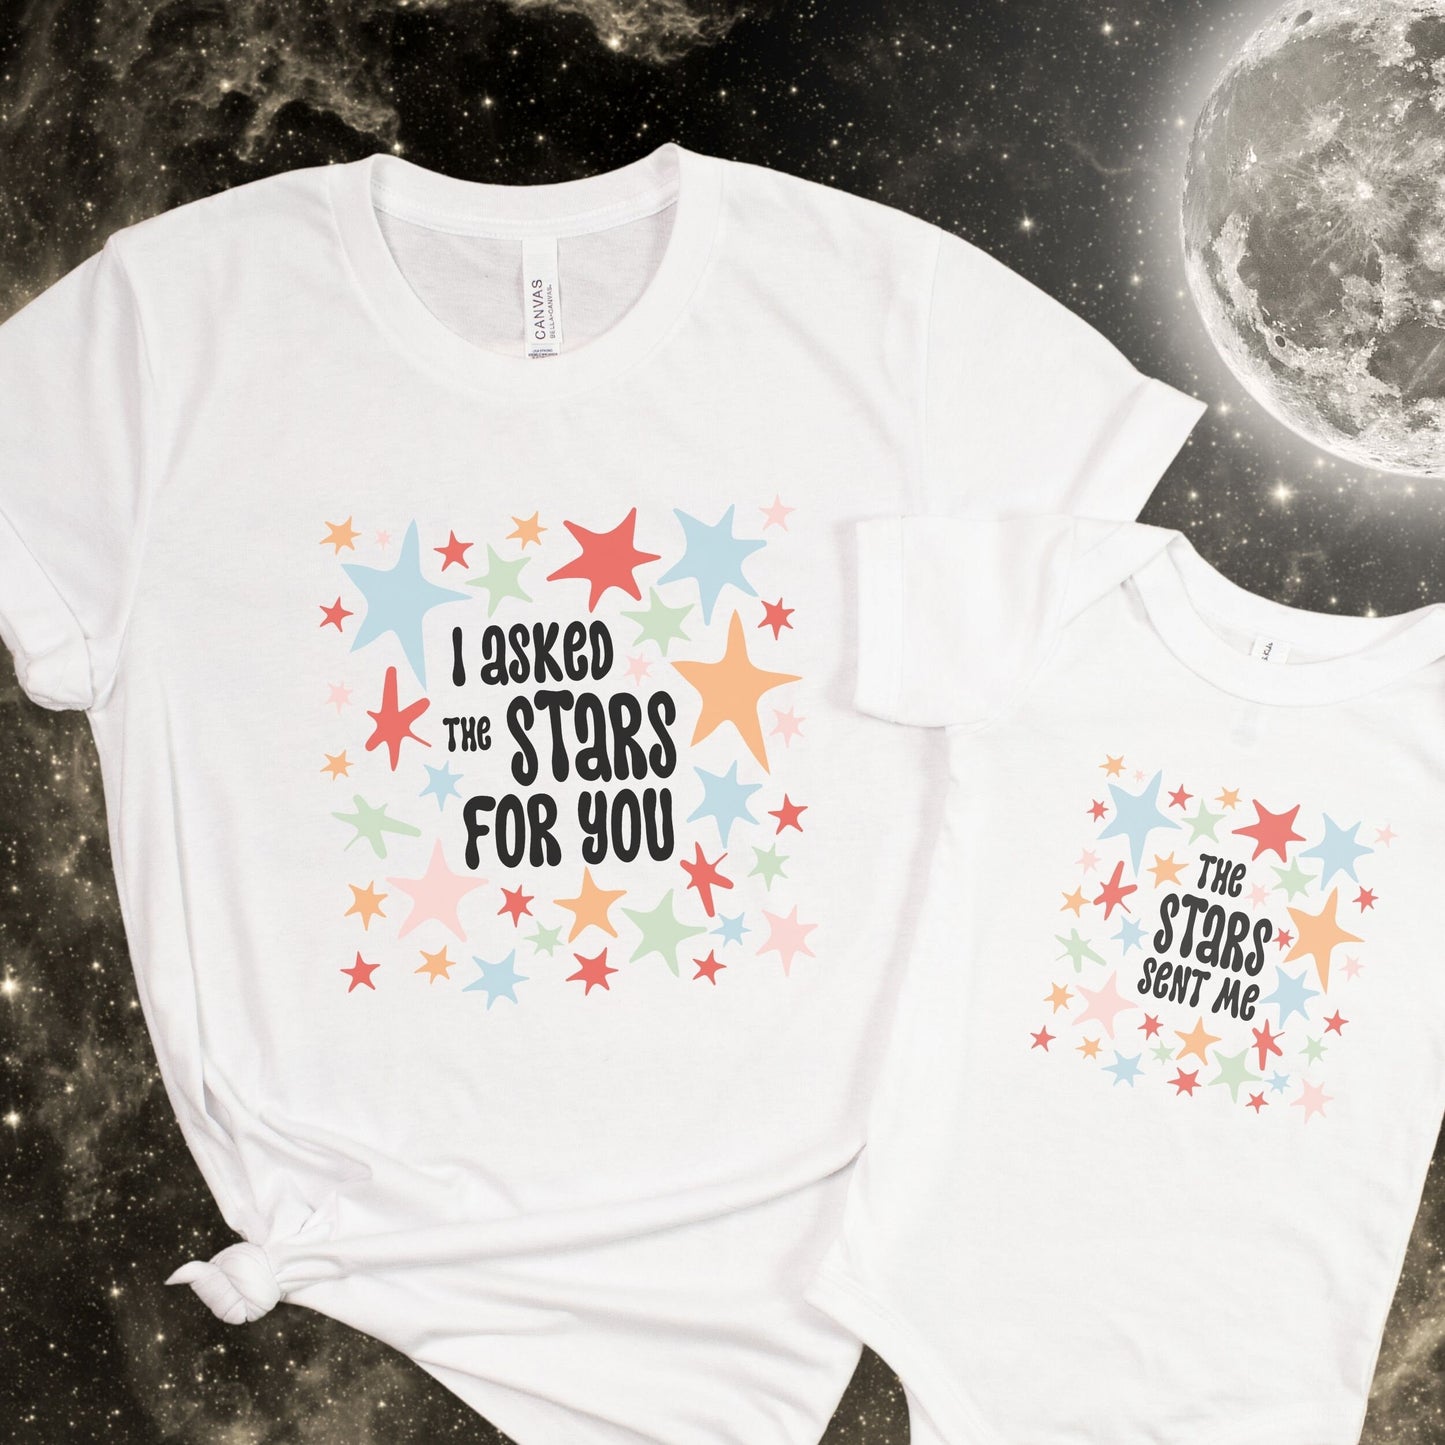 The Stars Mama Mini Shirts, Baby Bodysuit Gender Neutral Matching Family Tees IVF Adoption Gifts Rainbow Newborn Baby Gift Star Themed Party